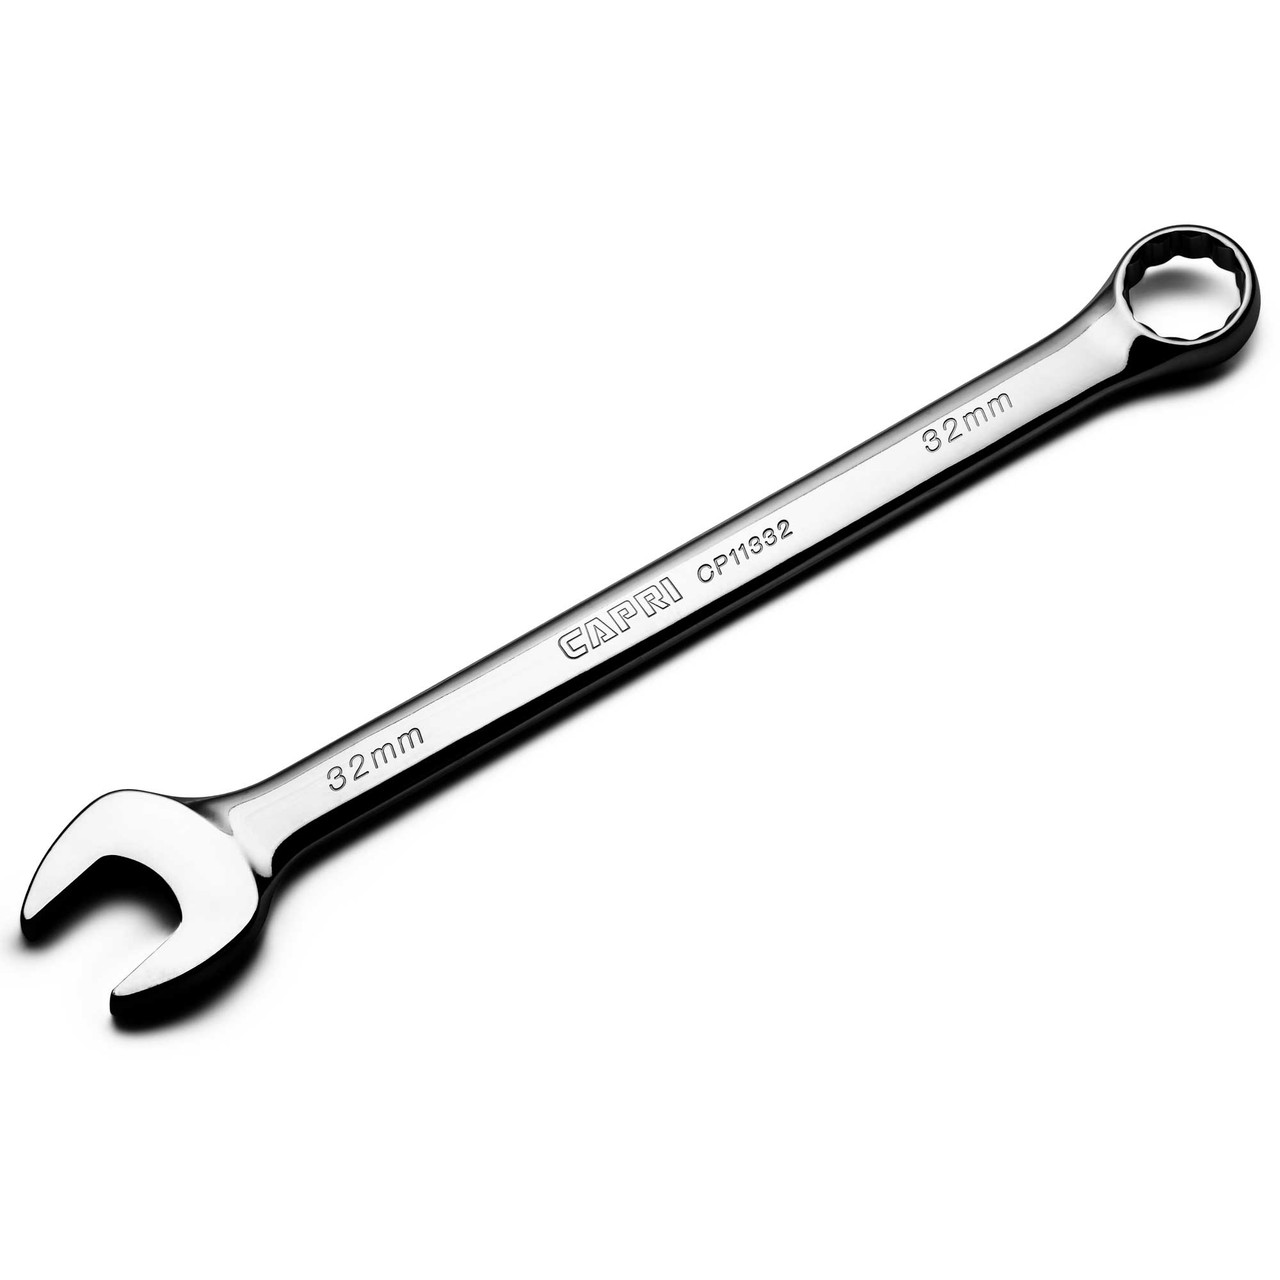 Capri Tools 32 mm Combination Wrench, 12 Point, Metric